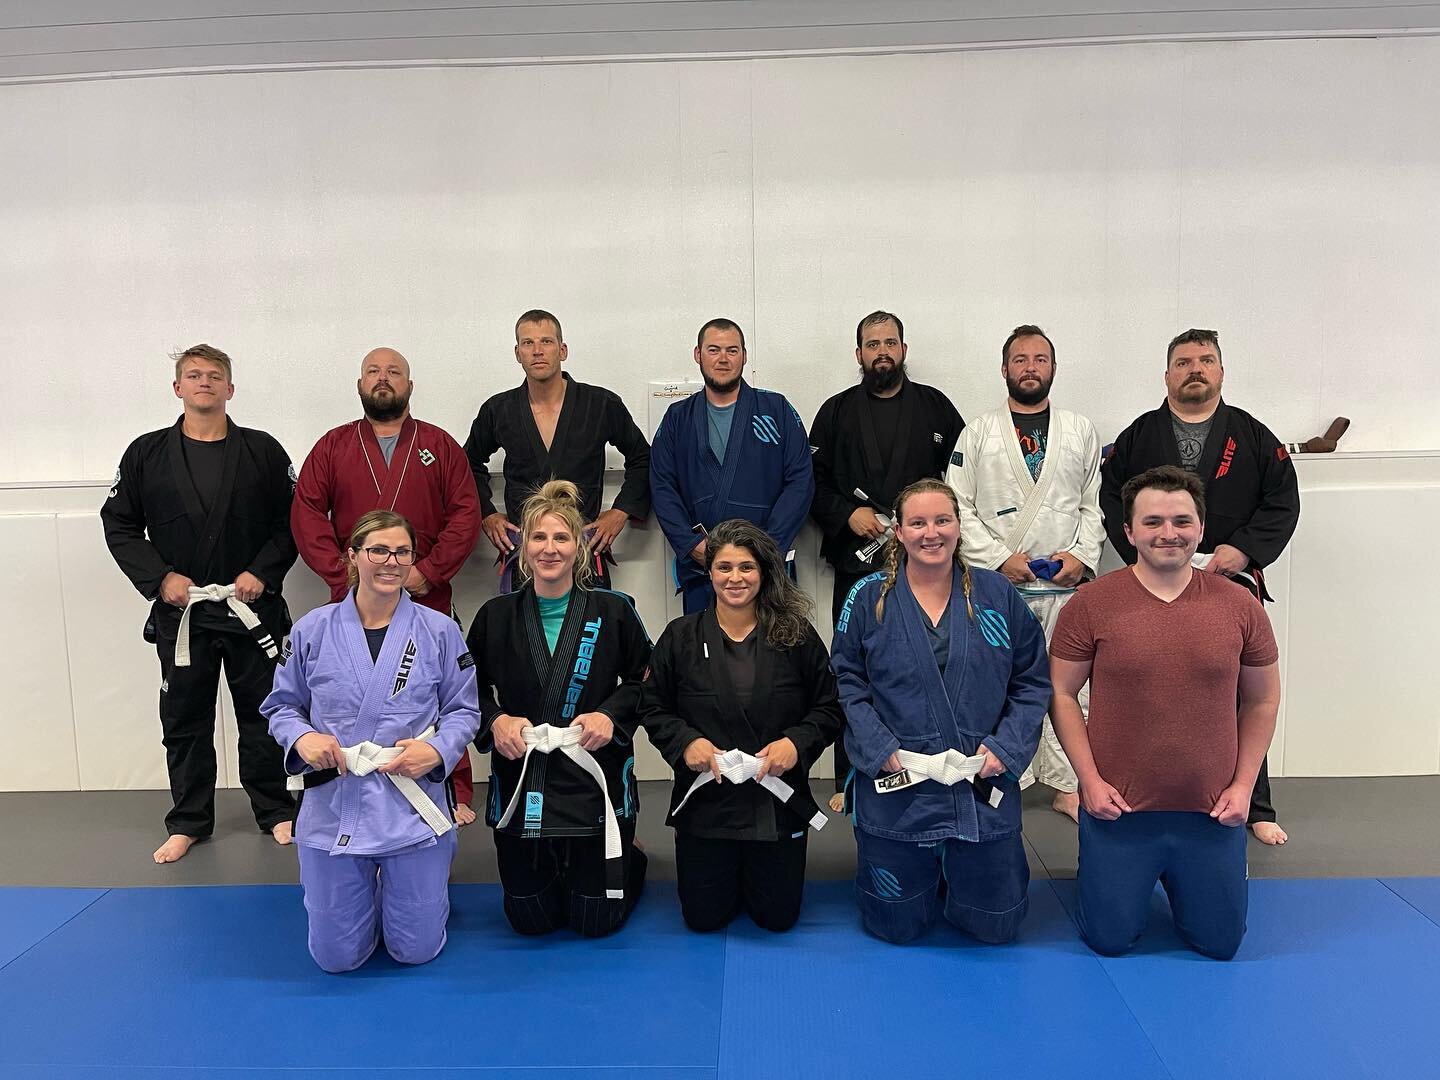 Fundamental and drilling class on Tuesday and Thursday has been very fun. It&rsquo;s a great way to start Jiu Jitsu but also important for our advanced students. If you have ever been interested in starting Jiu Jitsu this is the perfect class. Come t